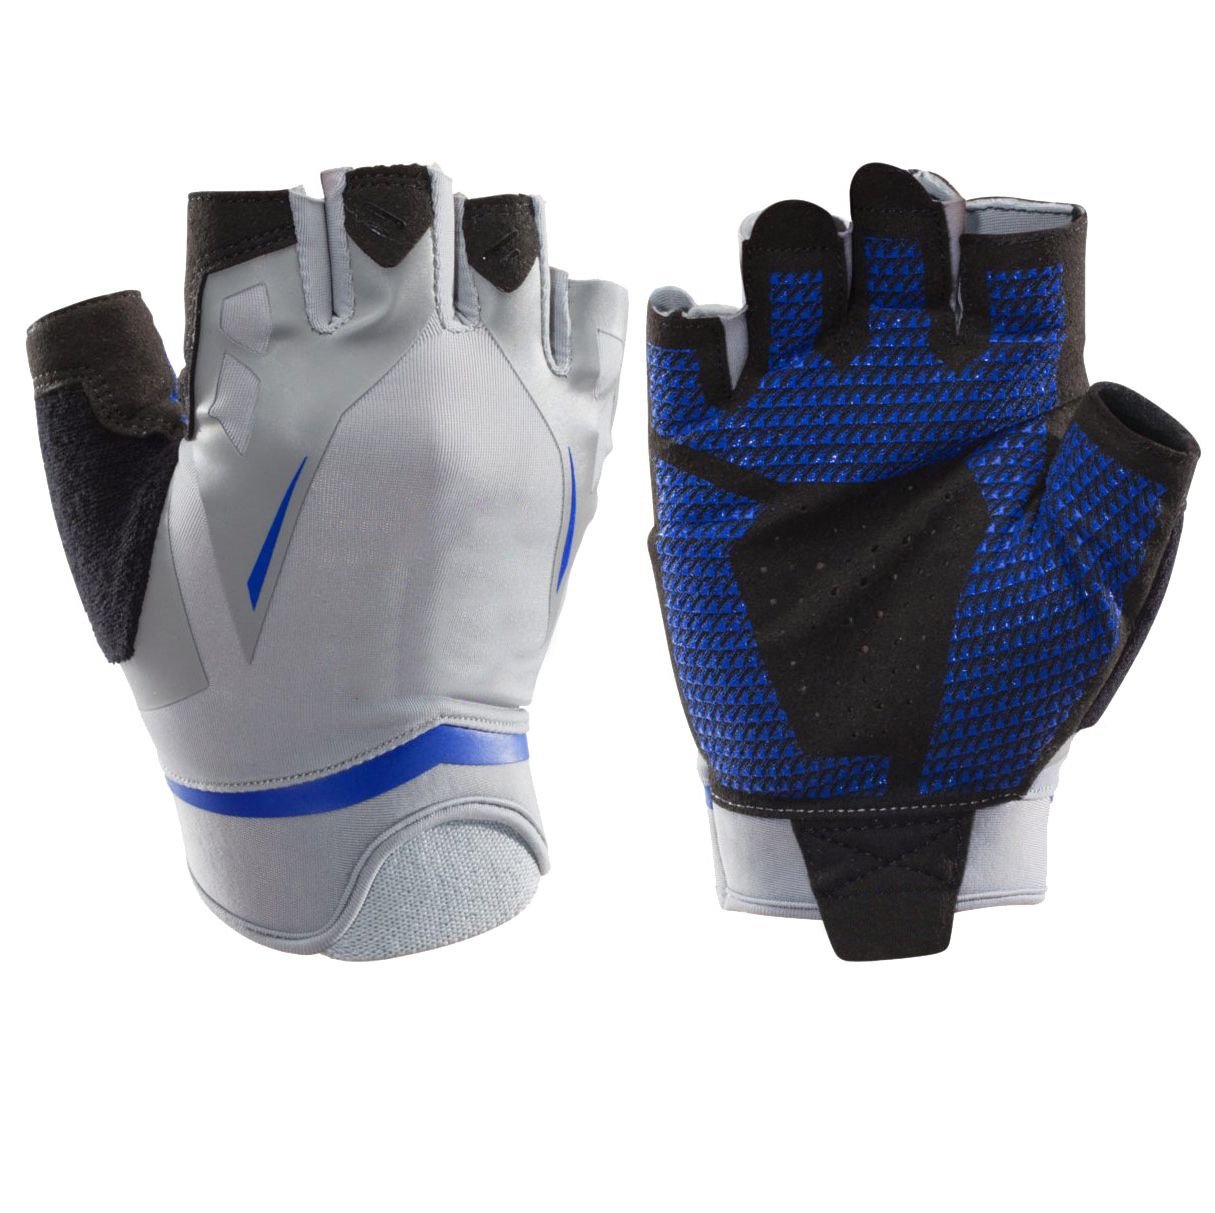 Nice grip control half-finger training gloves comfortable&cool weight lifting gloves